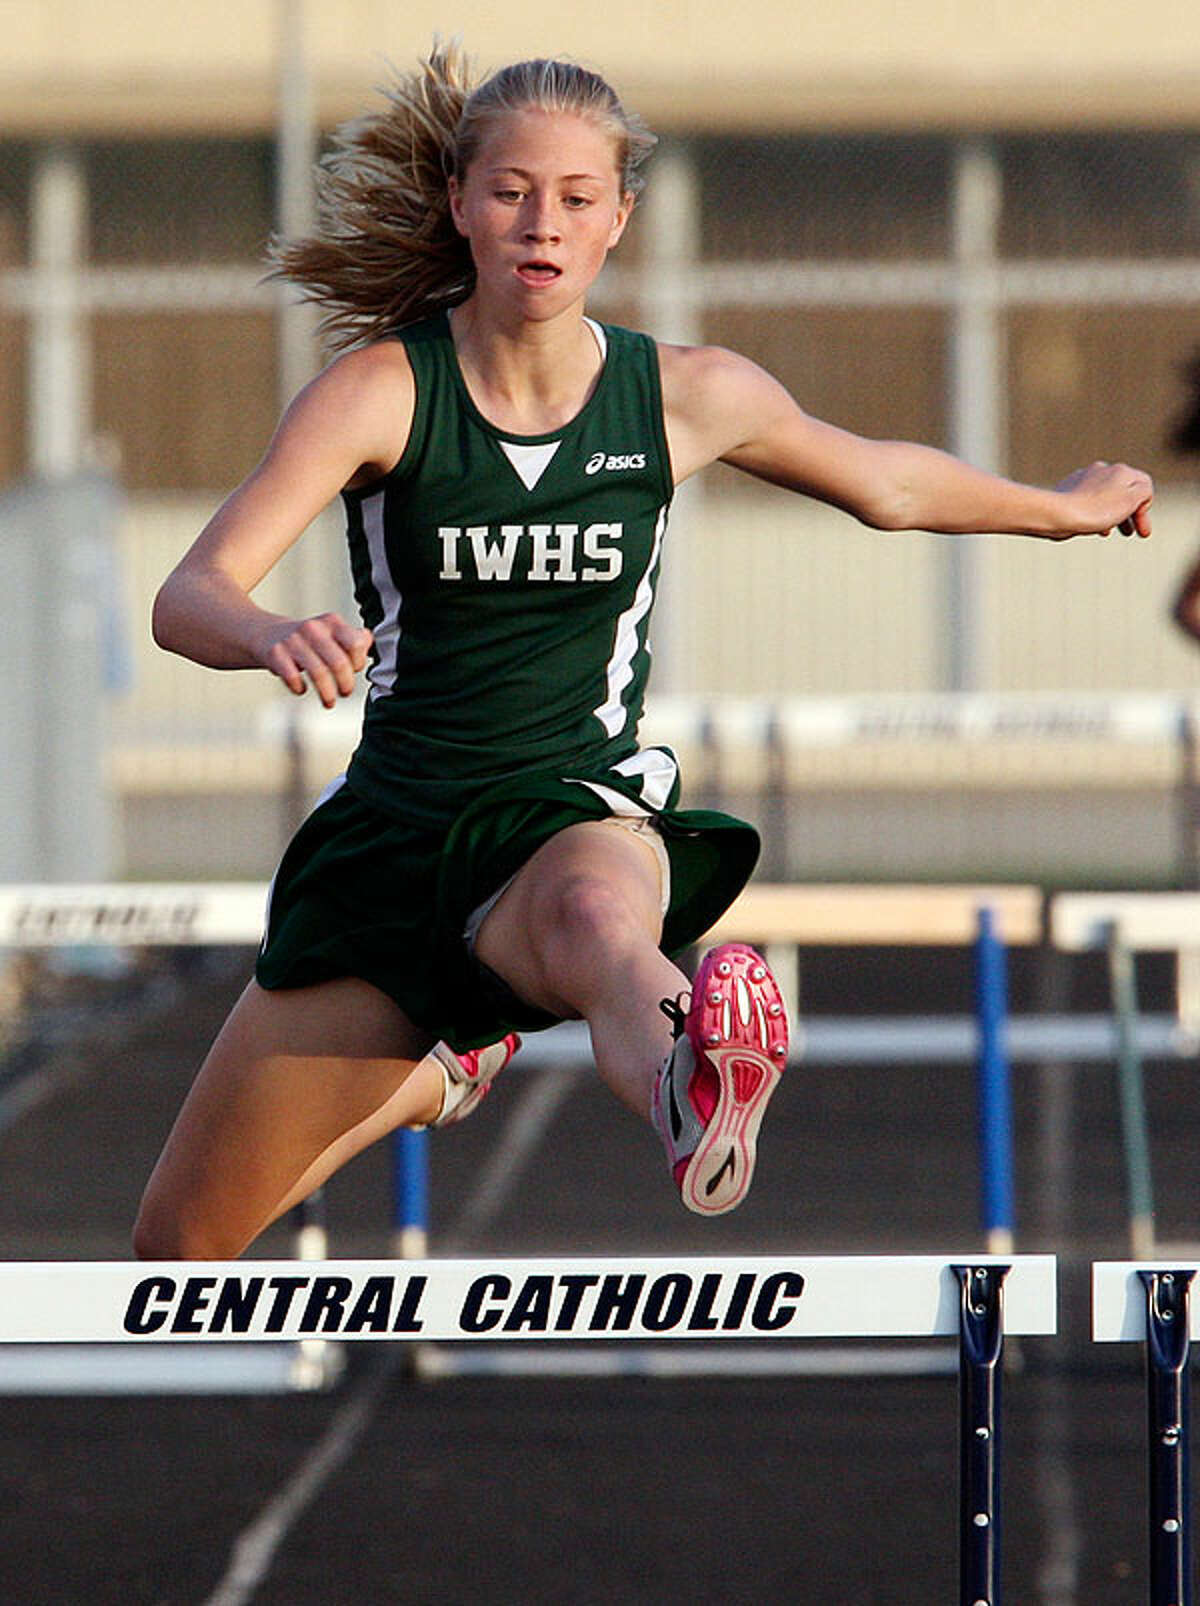 Incarnate Word's Emily Phillips clears the last hurdle in the 300-meter hurdles during the TAPPS 2-5A District Track Meet Thursday March 31, 2011 at Central Catholic High School. Phillips finished in first place.  EDWARD A. ORNELAS/eaornelas@express-news.net)